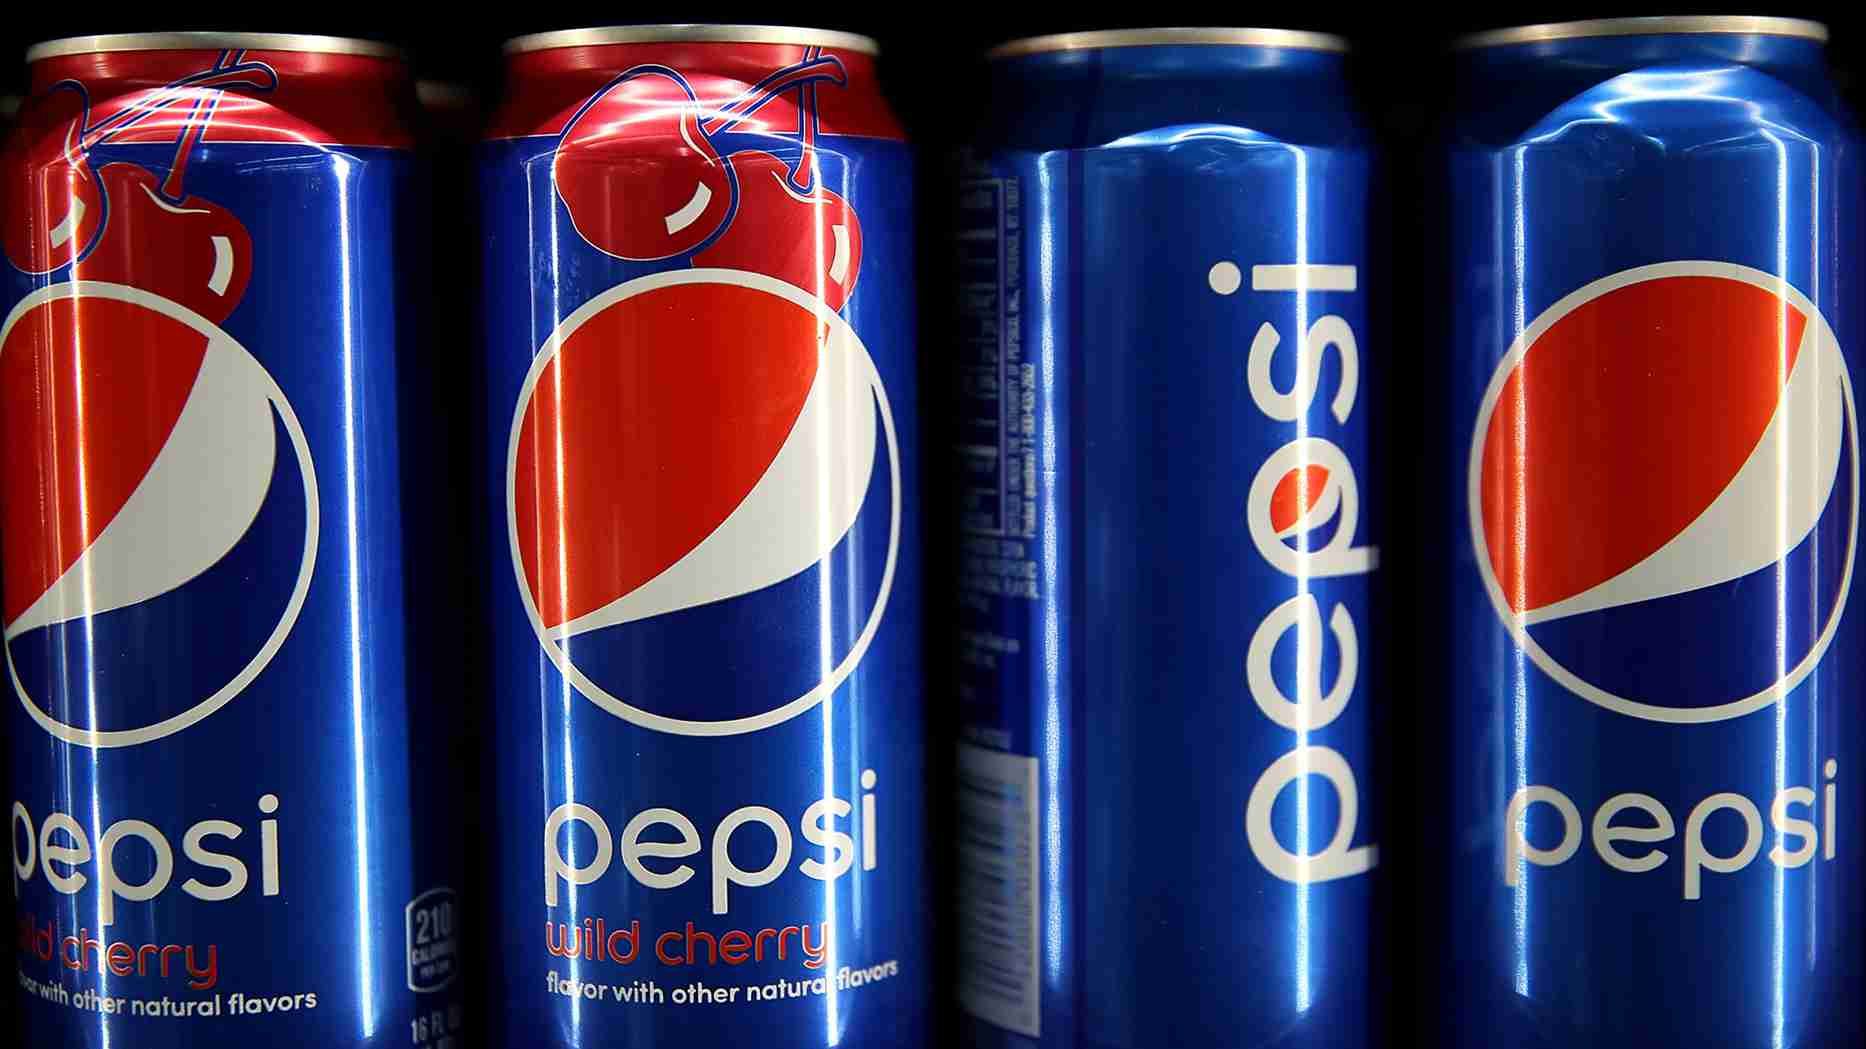 Pepsi hopes to add some fizz to its beverage lineup with SodaStream purchase